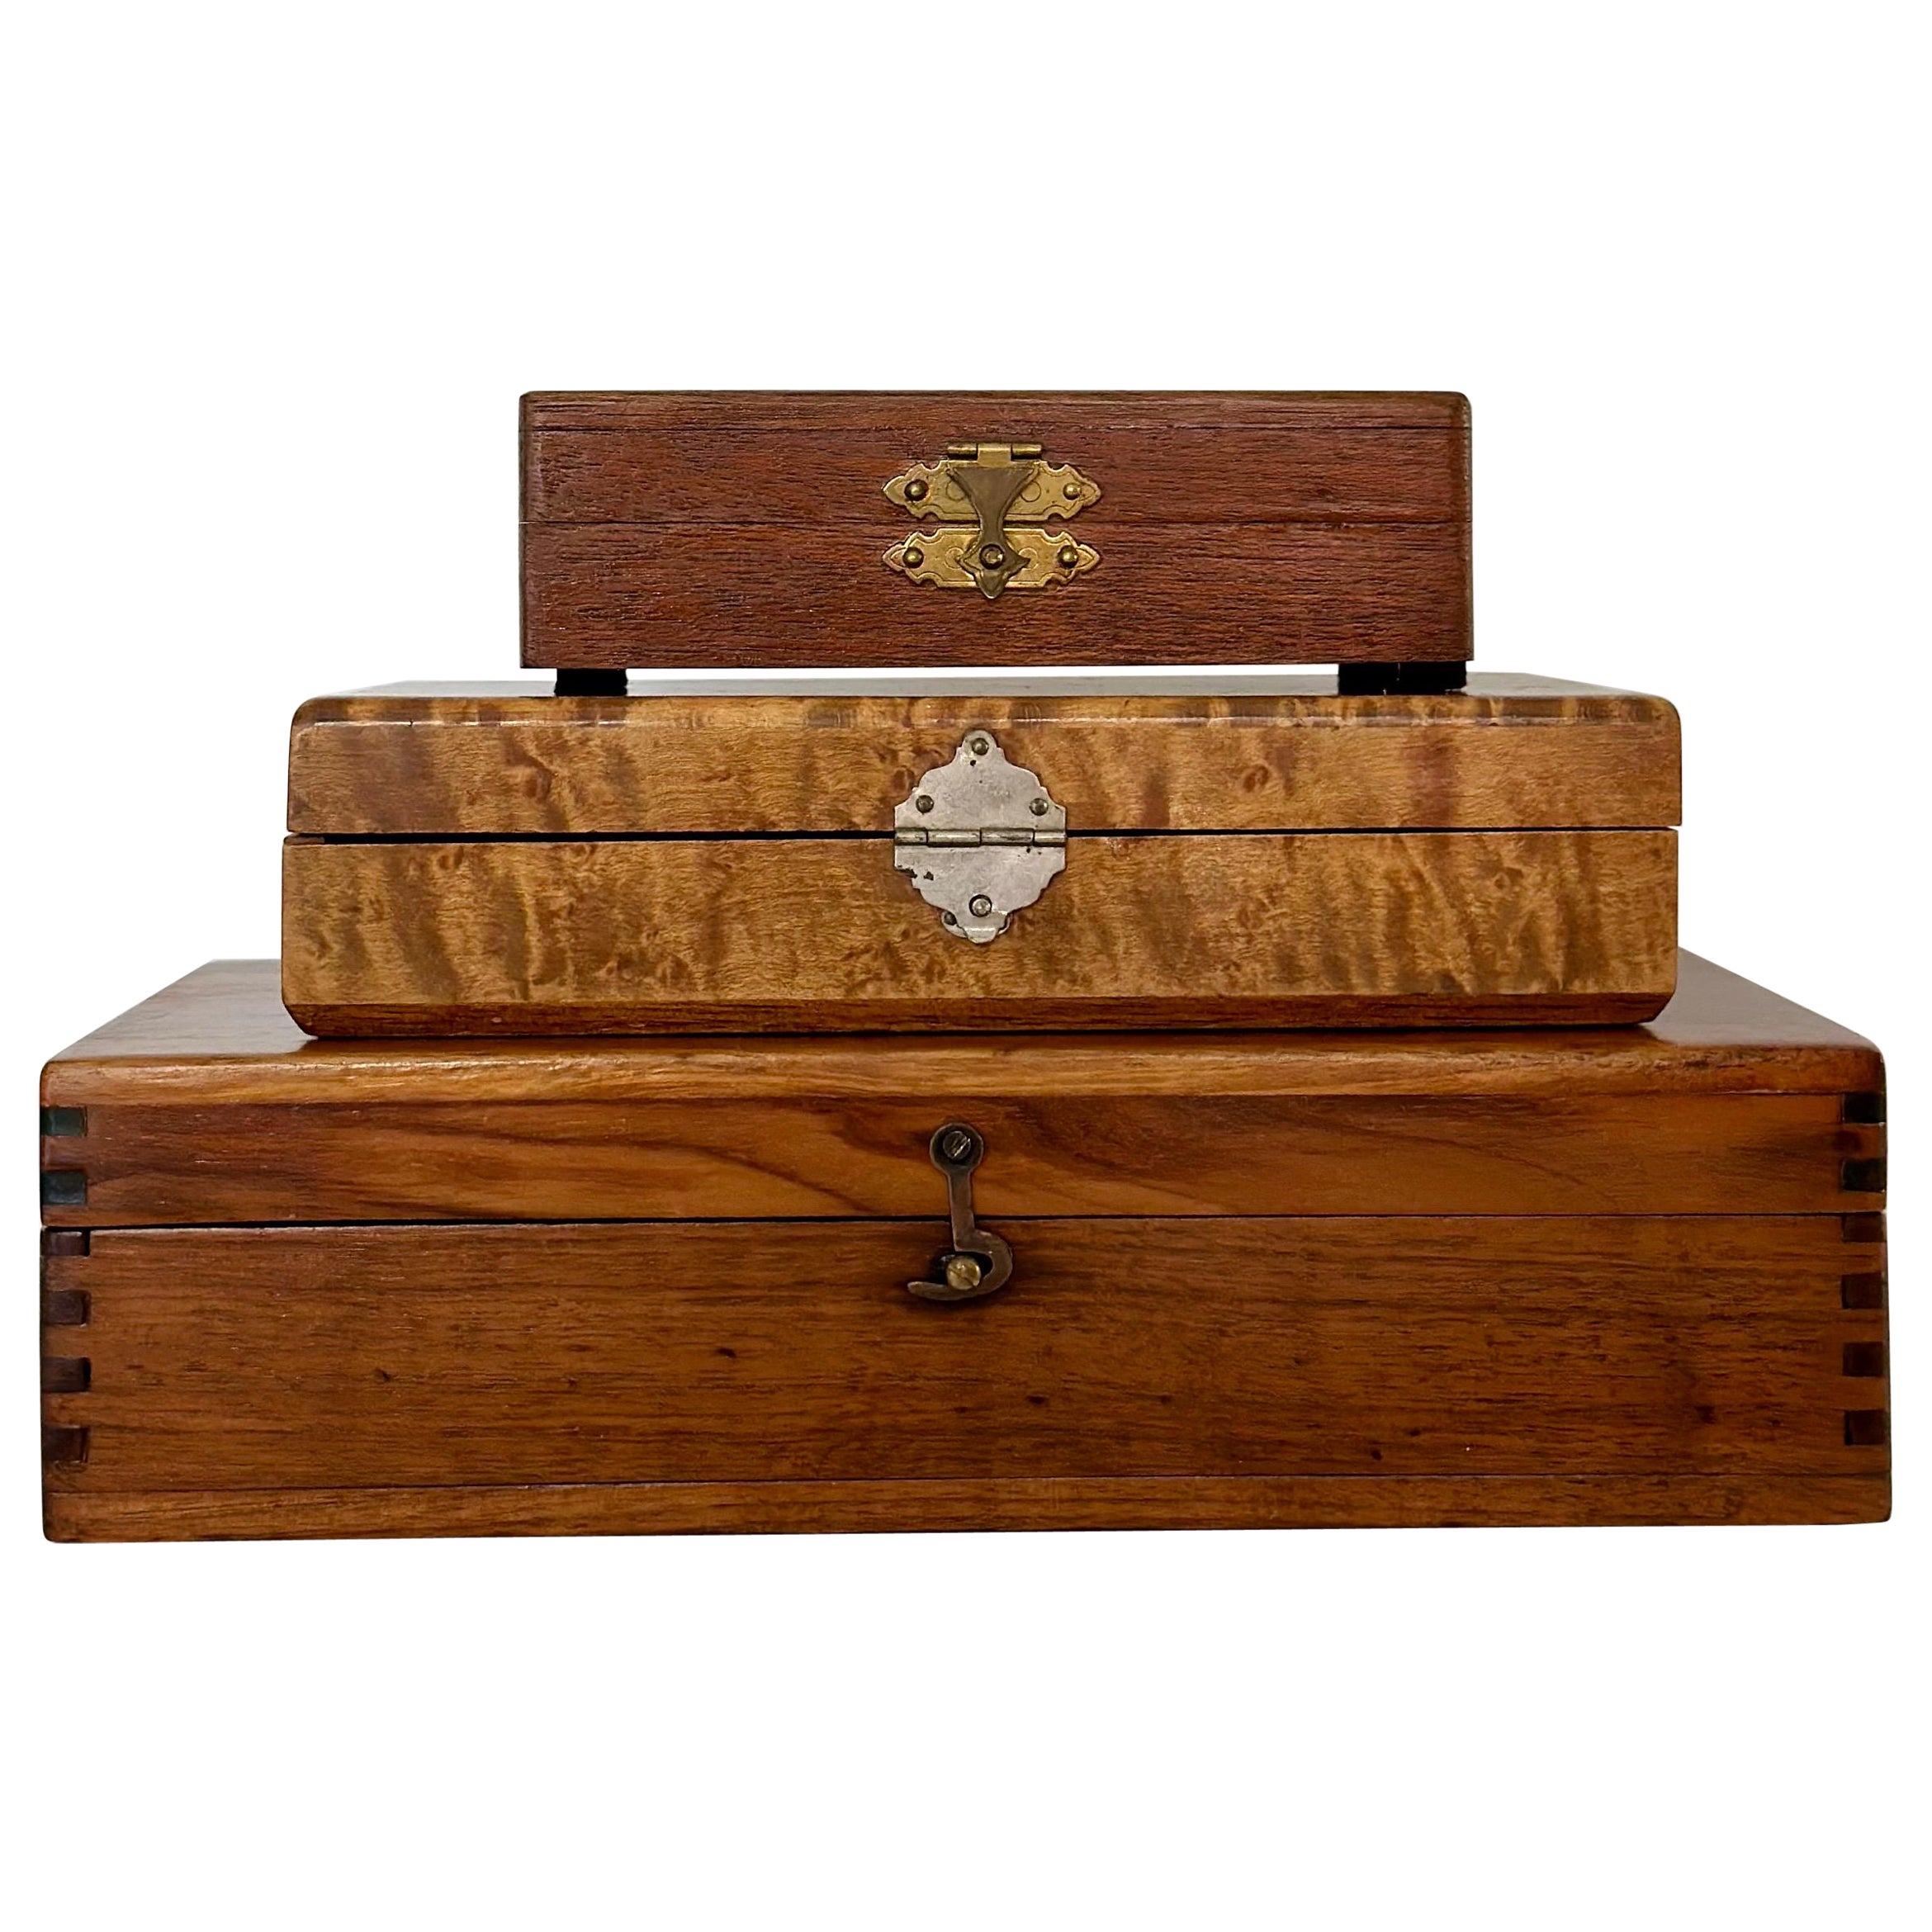 Antique Wood Vanity Jewelry Rectangular Boxes – Set of 3  For Sale